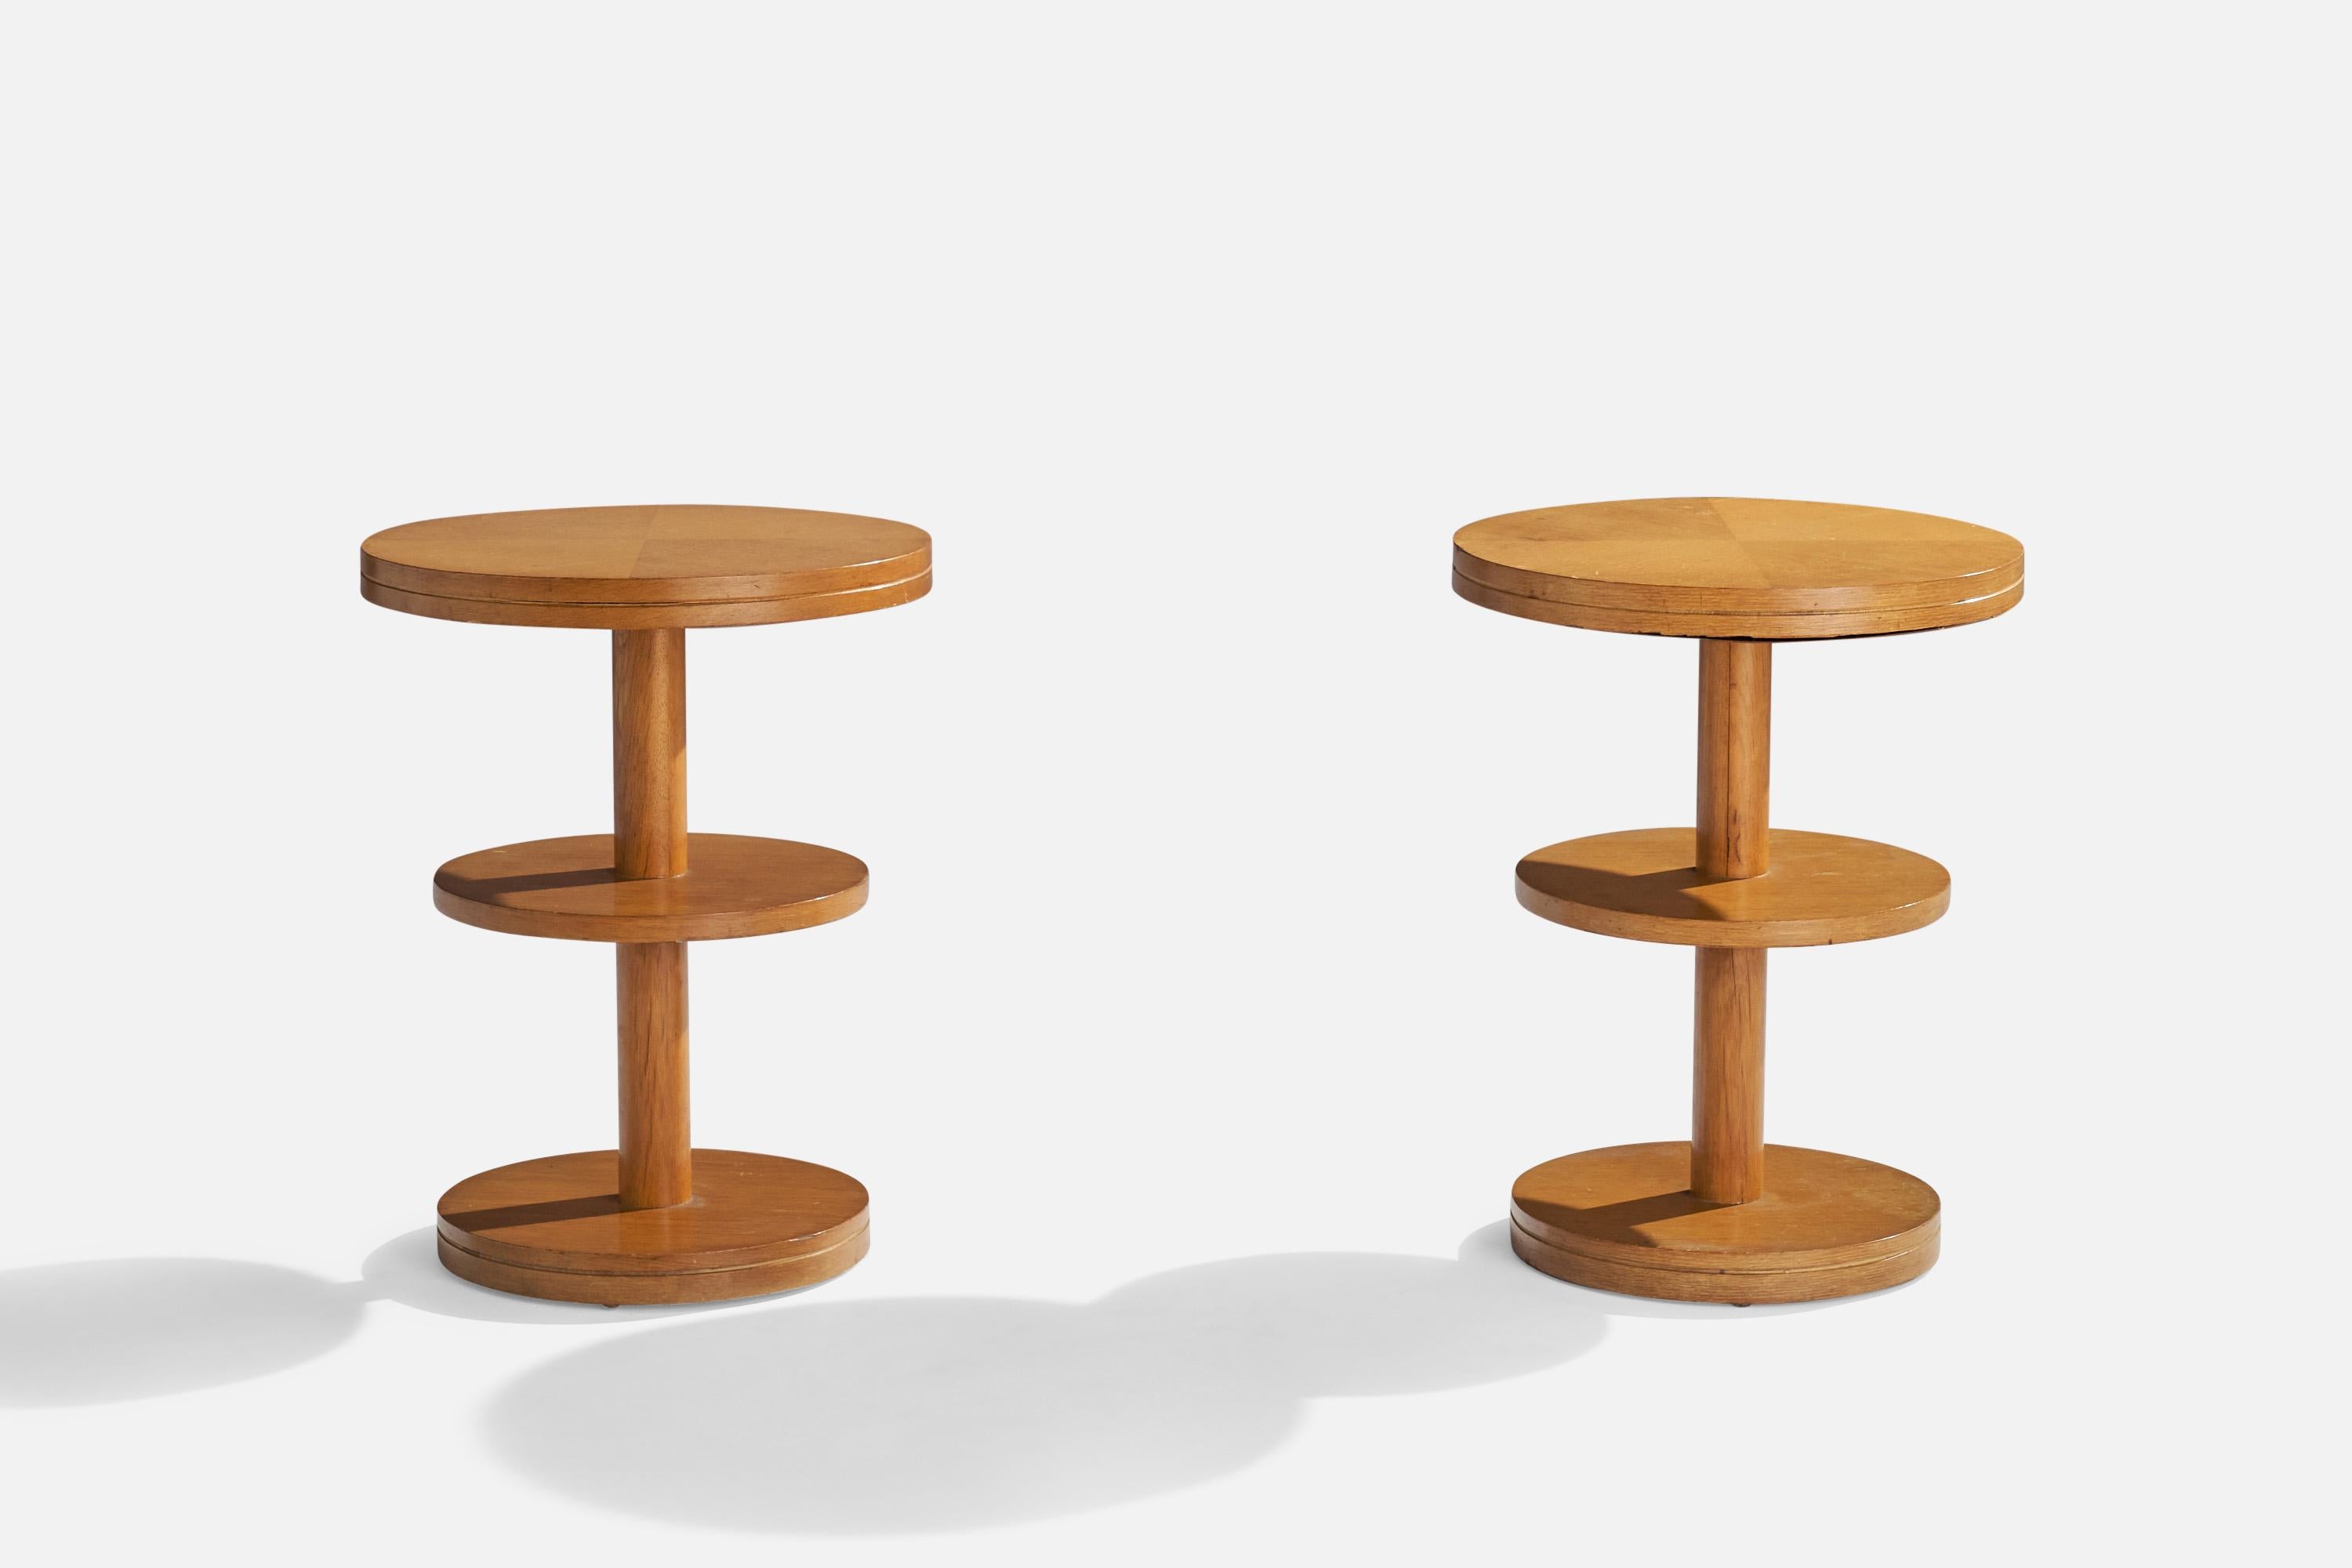 A pair of two-tiered wood end tables or side tables designed and produced in the US, 1950s.